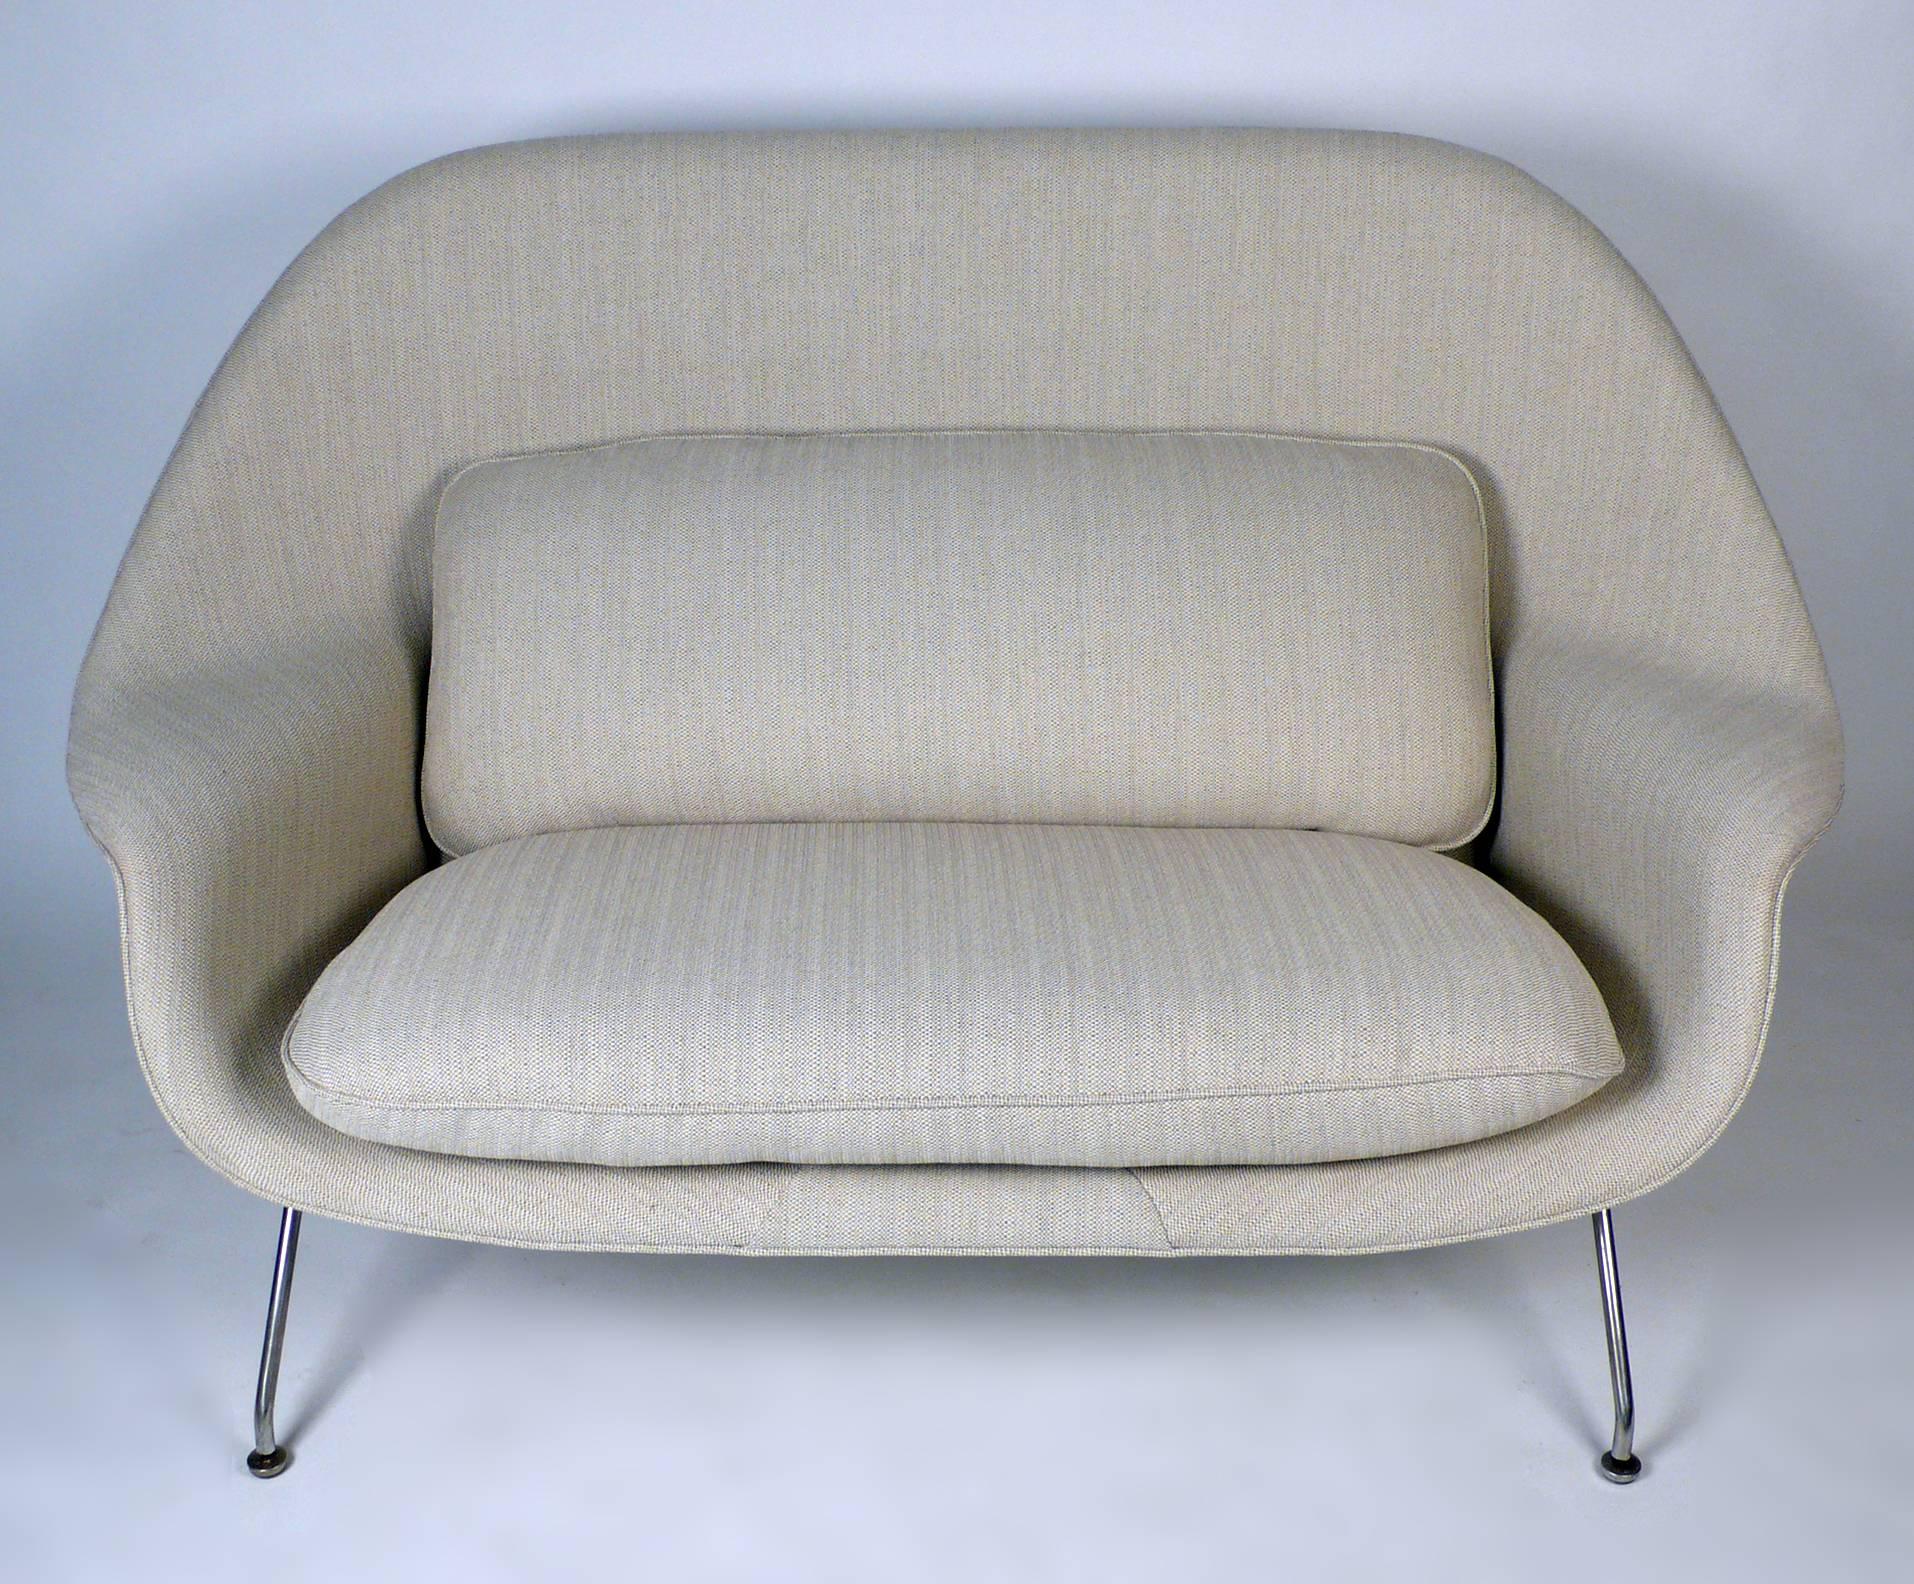 Early production womb sofa or settee designed by Eero Saarinen for Knoll, 1948. Saarinen saw this design and their necessary function as timeless. Sofa has been professionally refoamed and upholstered in a beautiful Knoll fabric. Seat height